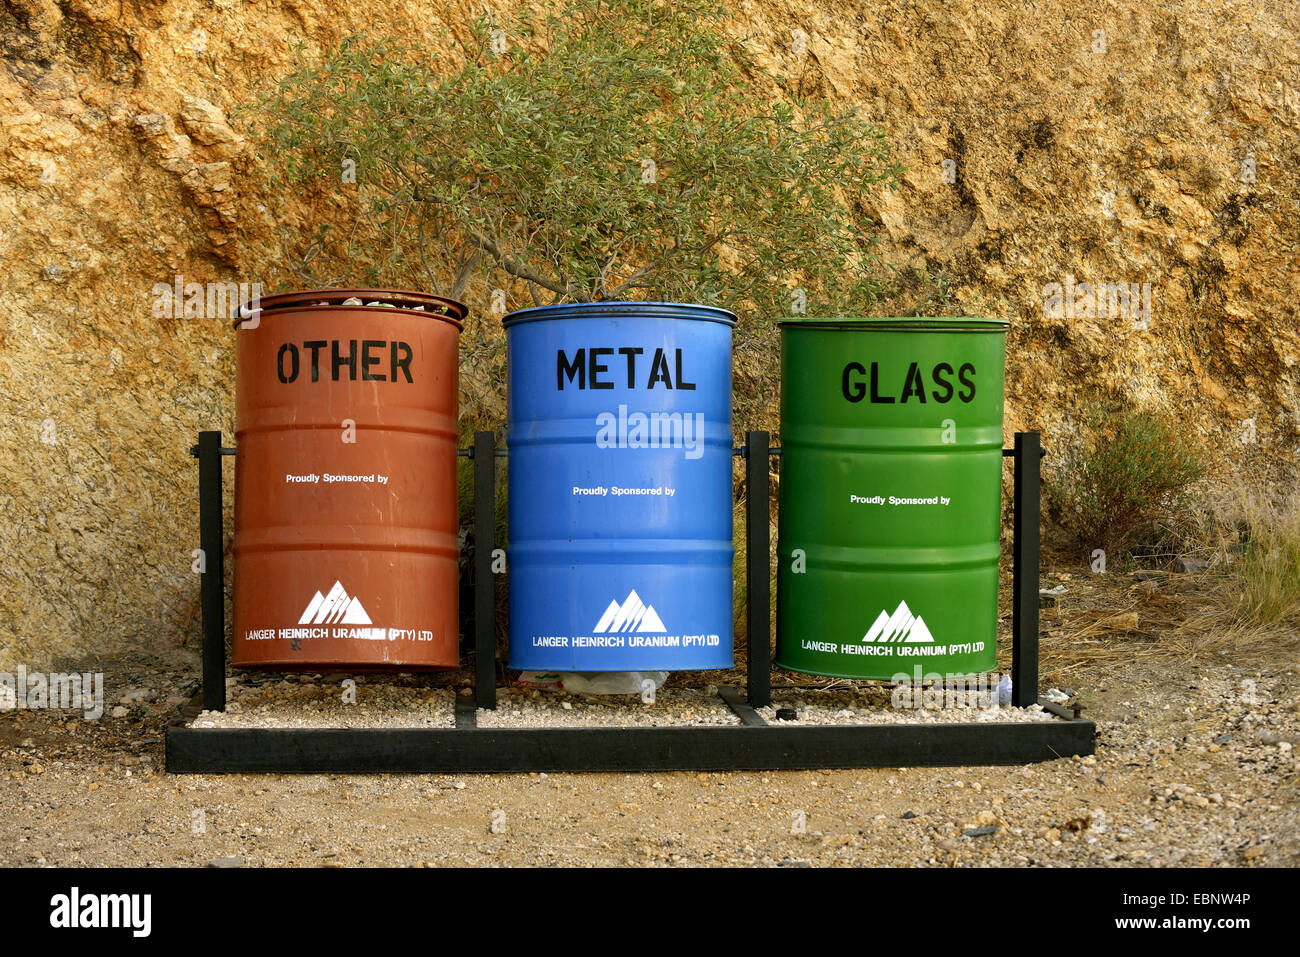 garbage in an outdoor camp, Namibia Stock Photo